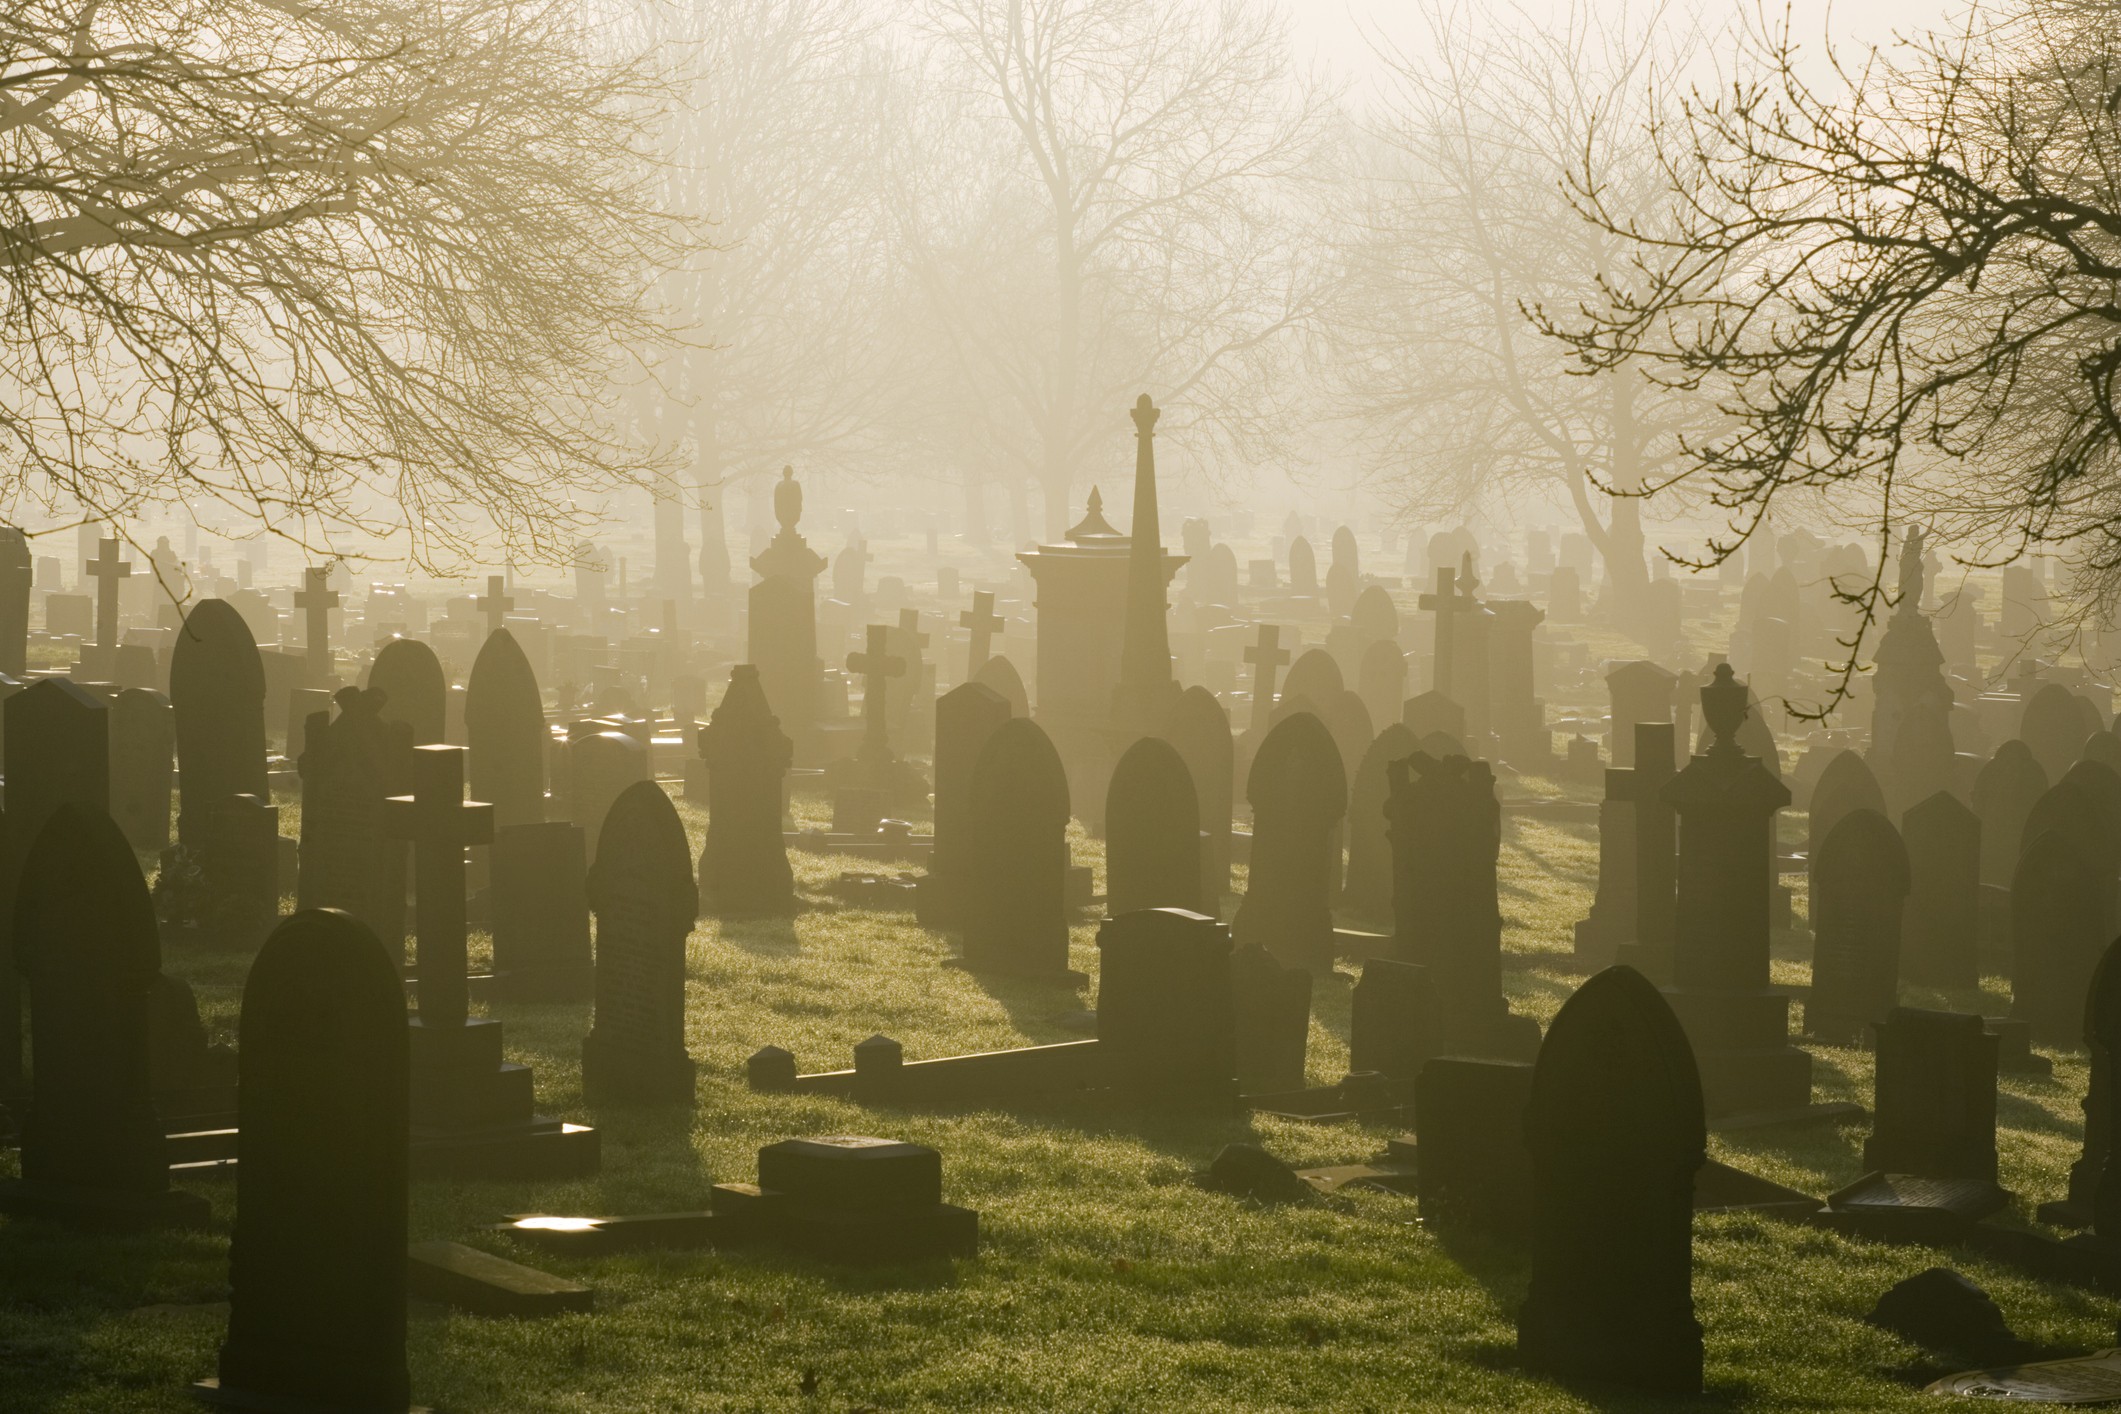 Low winter sunlight flooding through a misty cemetery in Stoke-on-Trent. (Foto: Getty Images)